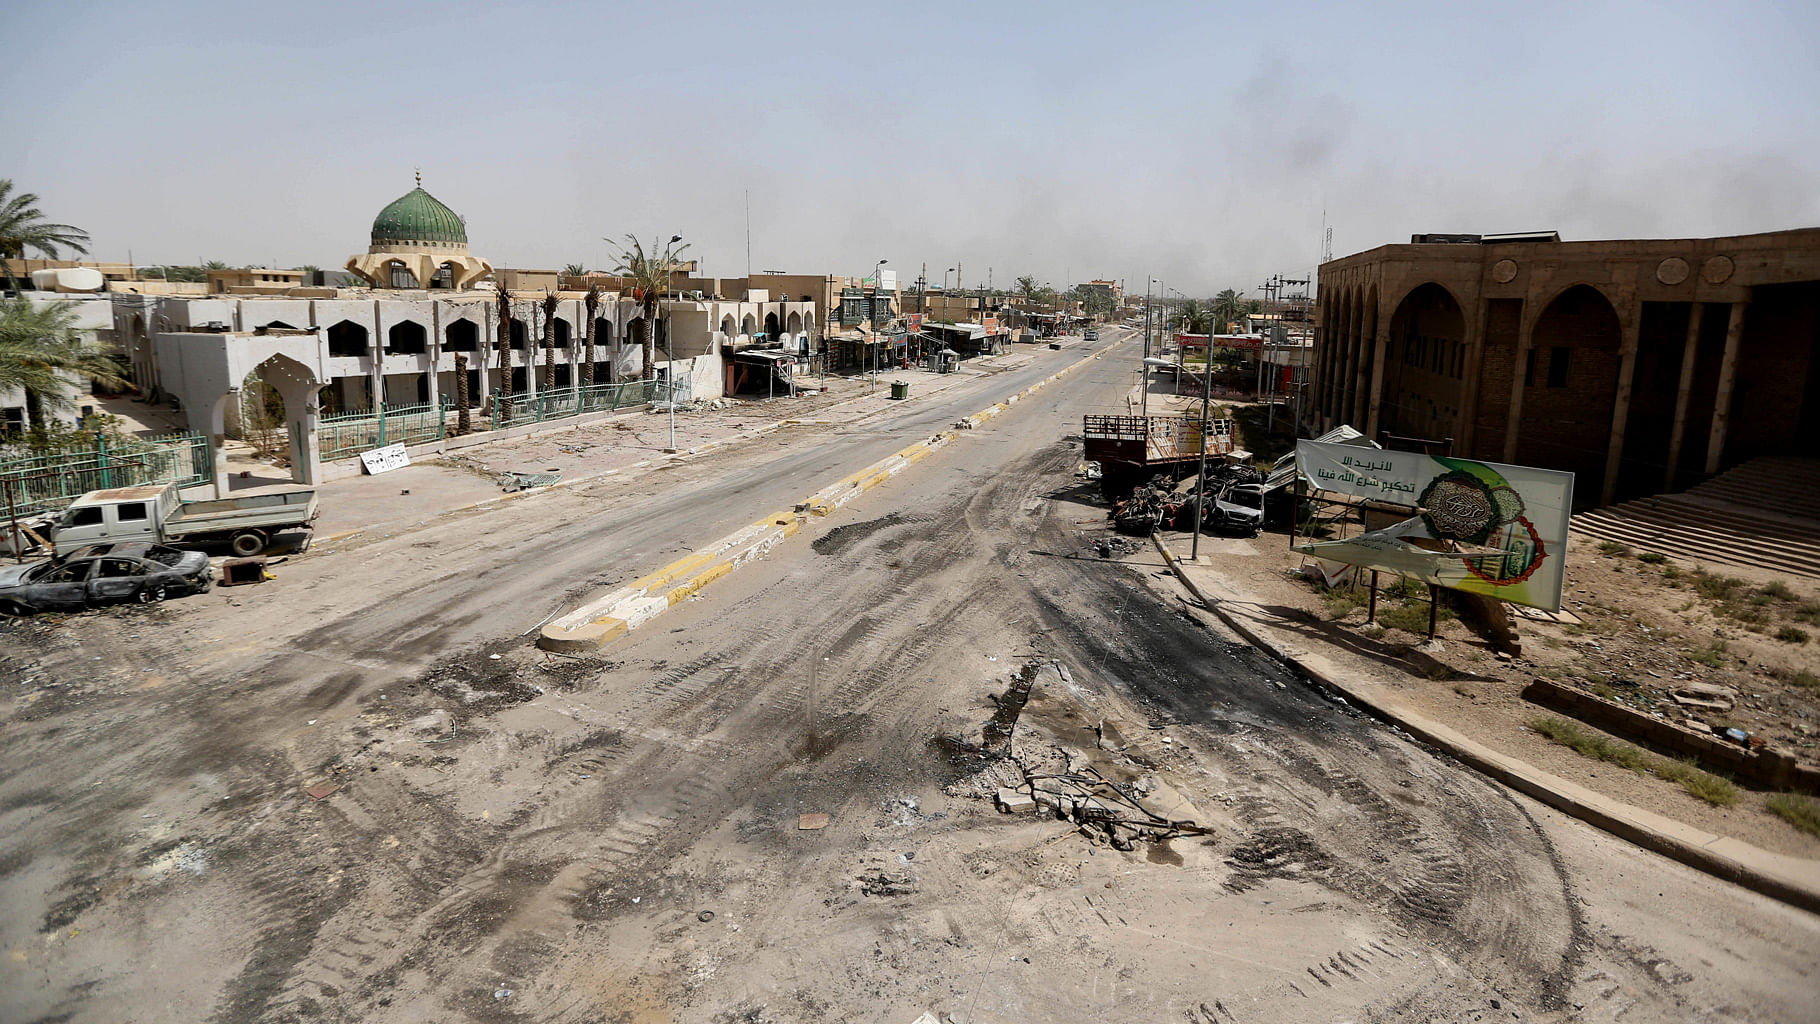 Thick clouds of black smoke billowed in northwest Fallujah as dozens of homes continued to burn after the city was declared “fully liberated” from the ISIS. (Photo: AP)